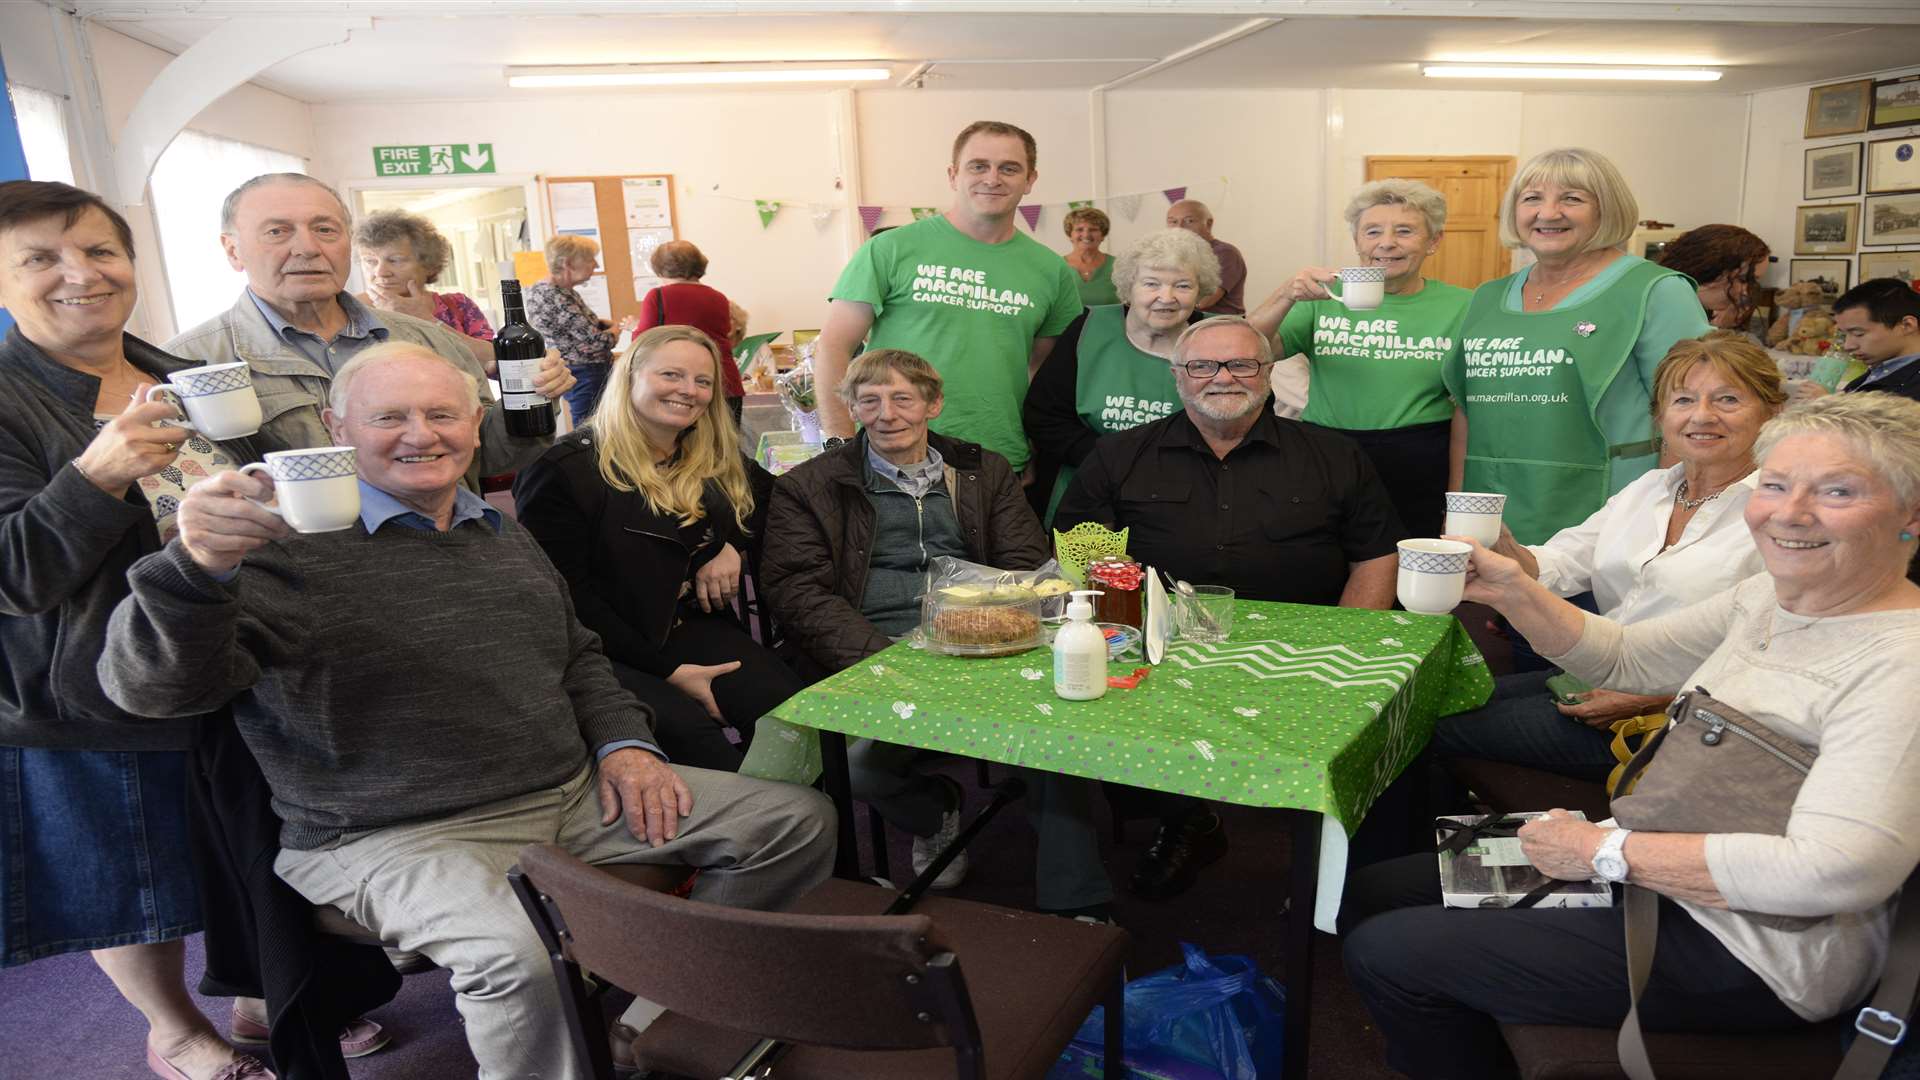 Customers and helpers at the Macmillan coffee morning held at Hesketh Park Bowls Club, Dartford on Friday morning.